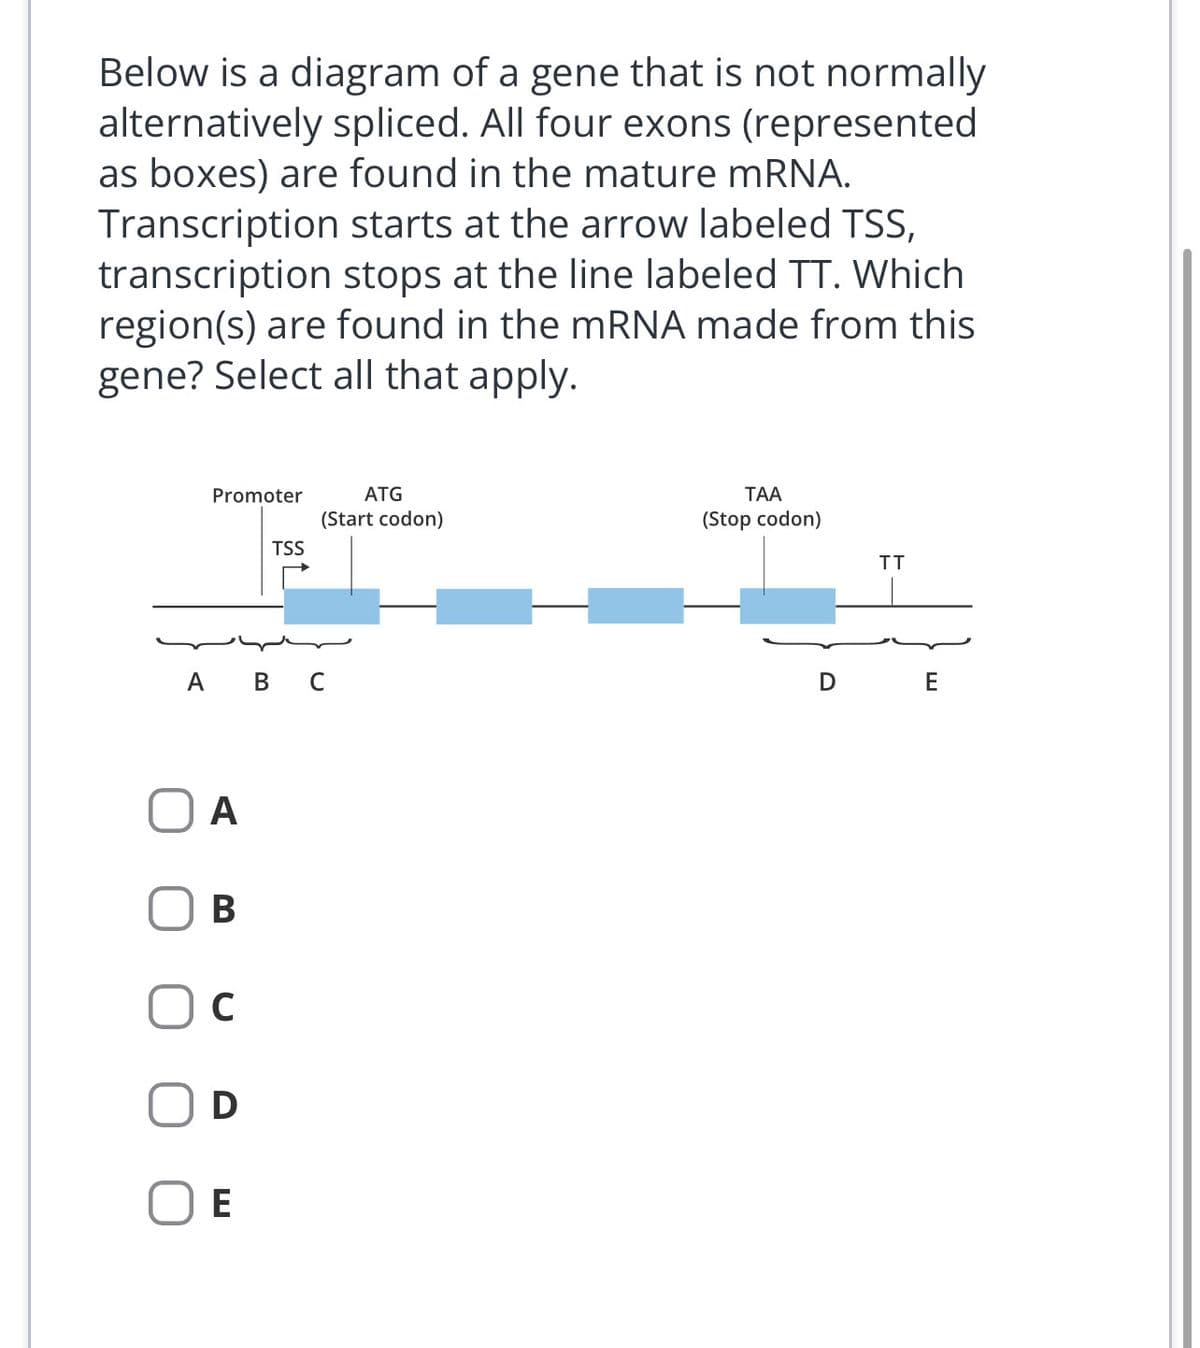 Below is a diagram of a gene that is not normally
alternatively spliced. All four exons (represented
as boxes) are found in the mature mRNA.
Transcription starts at the arrow labeled TSS,
transcription stops at the line labeled TT. Which
region(s) are found in the mRNA made from this
gene? Select all that apply.
Promoter
A
A B C
B
C
D
TSS
E
ATG
(Start codon)
TAA
(Stop codon)
TT
D E